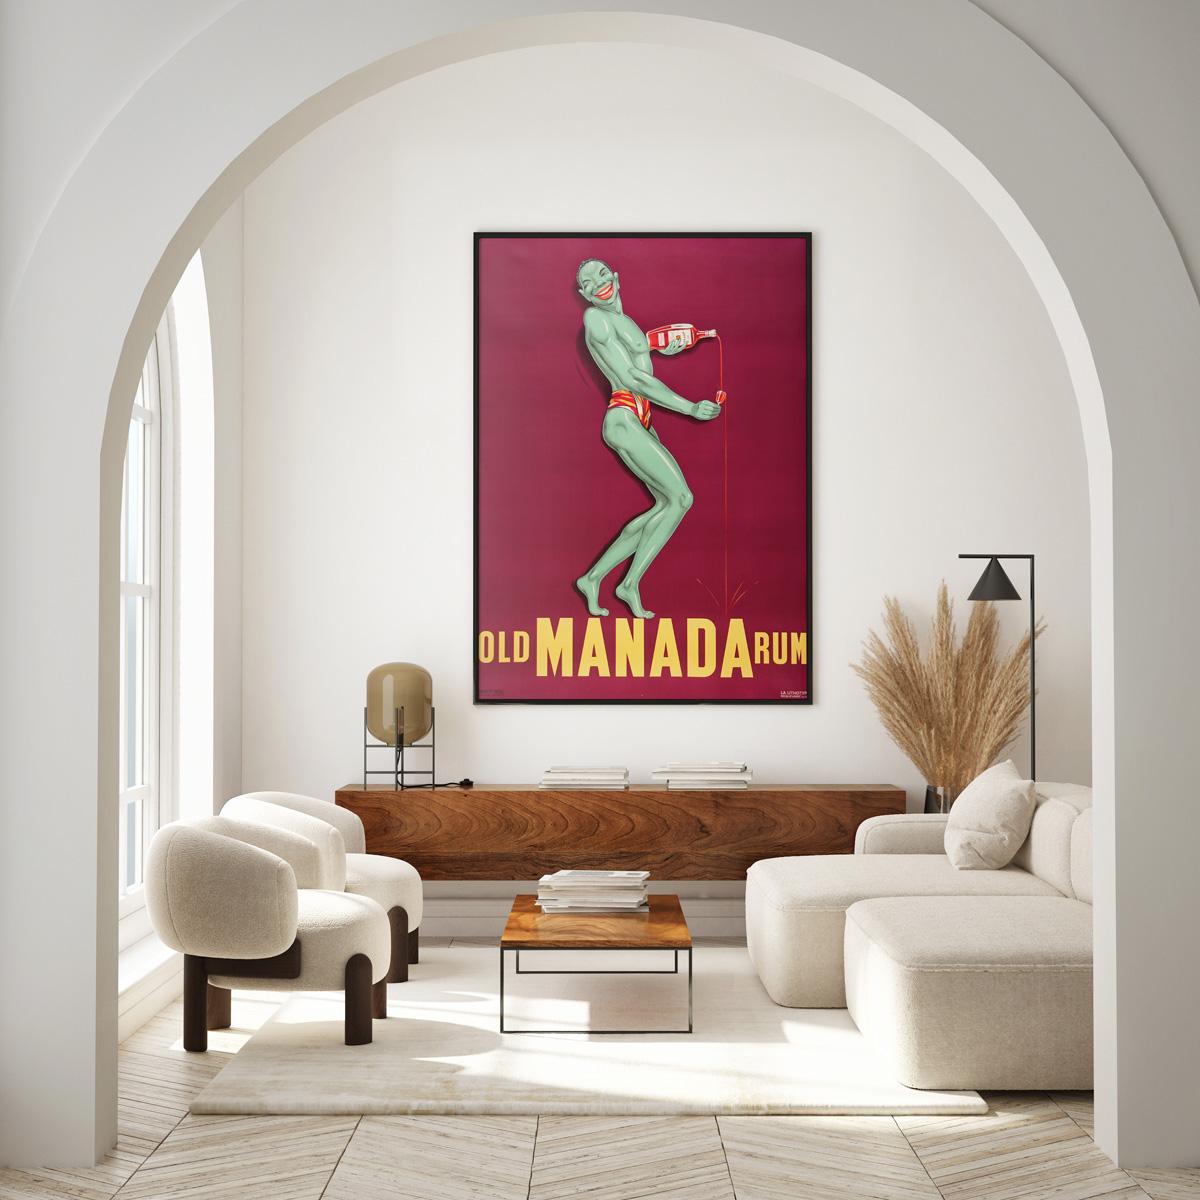 Fabulous original vintage French alcohol advertising poster for Old Manada Rum. This French poster is from the 1930’s and features a stunning image of this joyful green man almost floating off the contrasting purple background. Smiling while holding